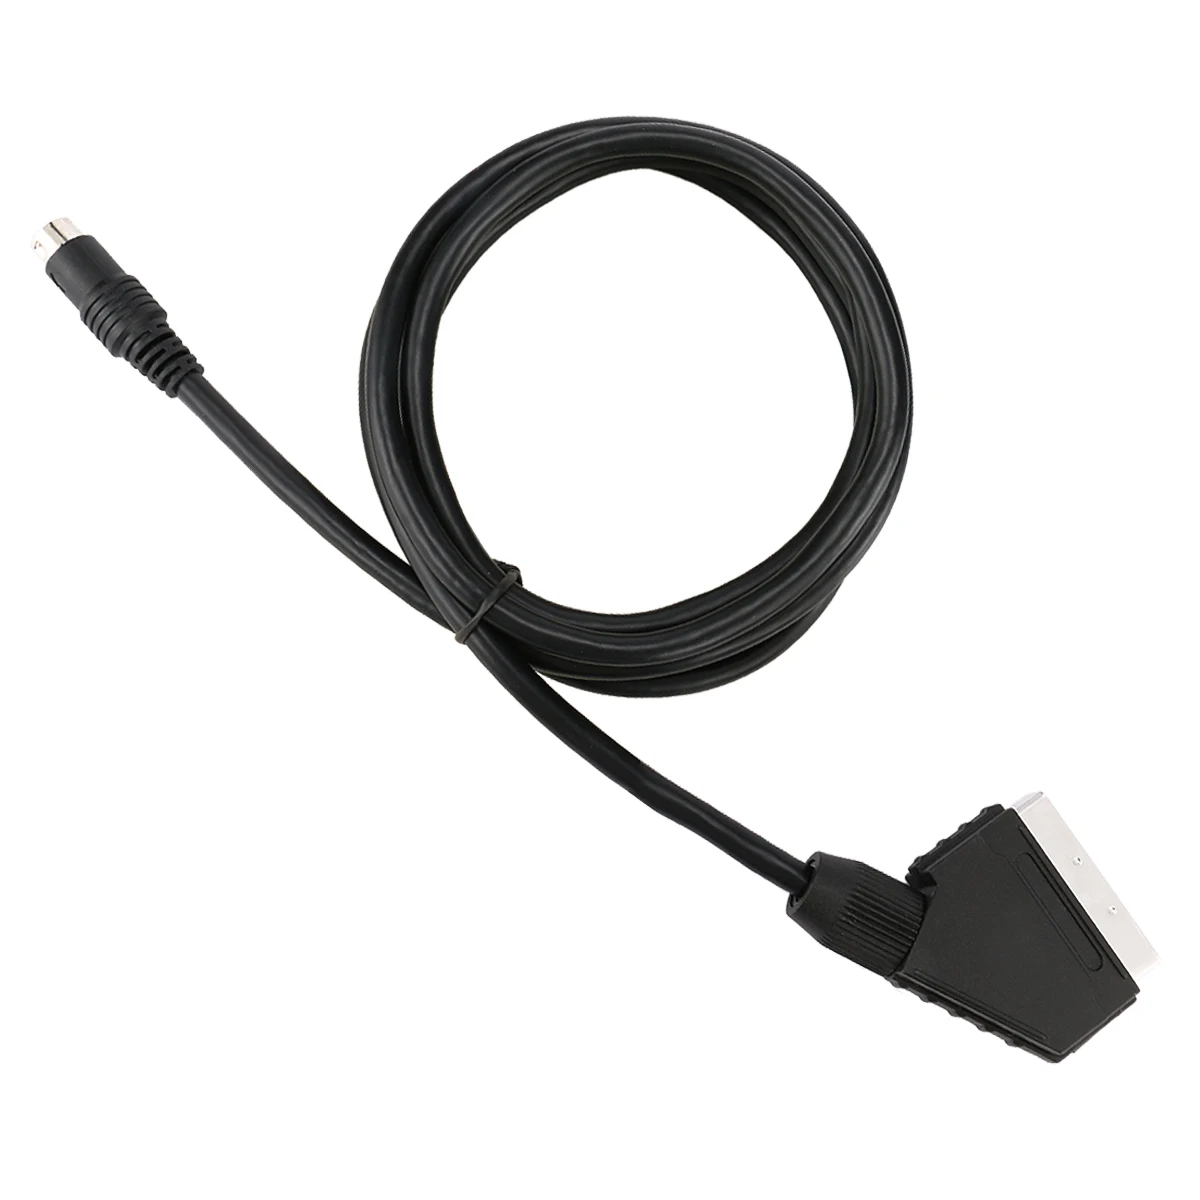 Totkakka Cable Black color 9-PIN Mini TO 9-PIN Mini Din Signal Cable For Genesis 2 Scart Cable Hot Promotion signal line Black